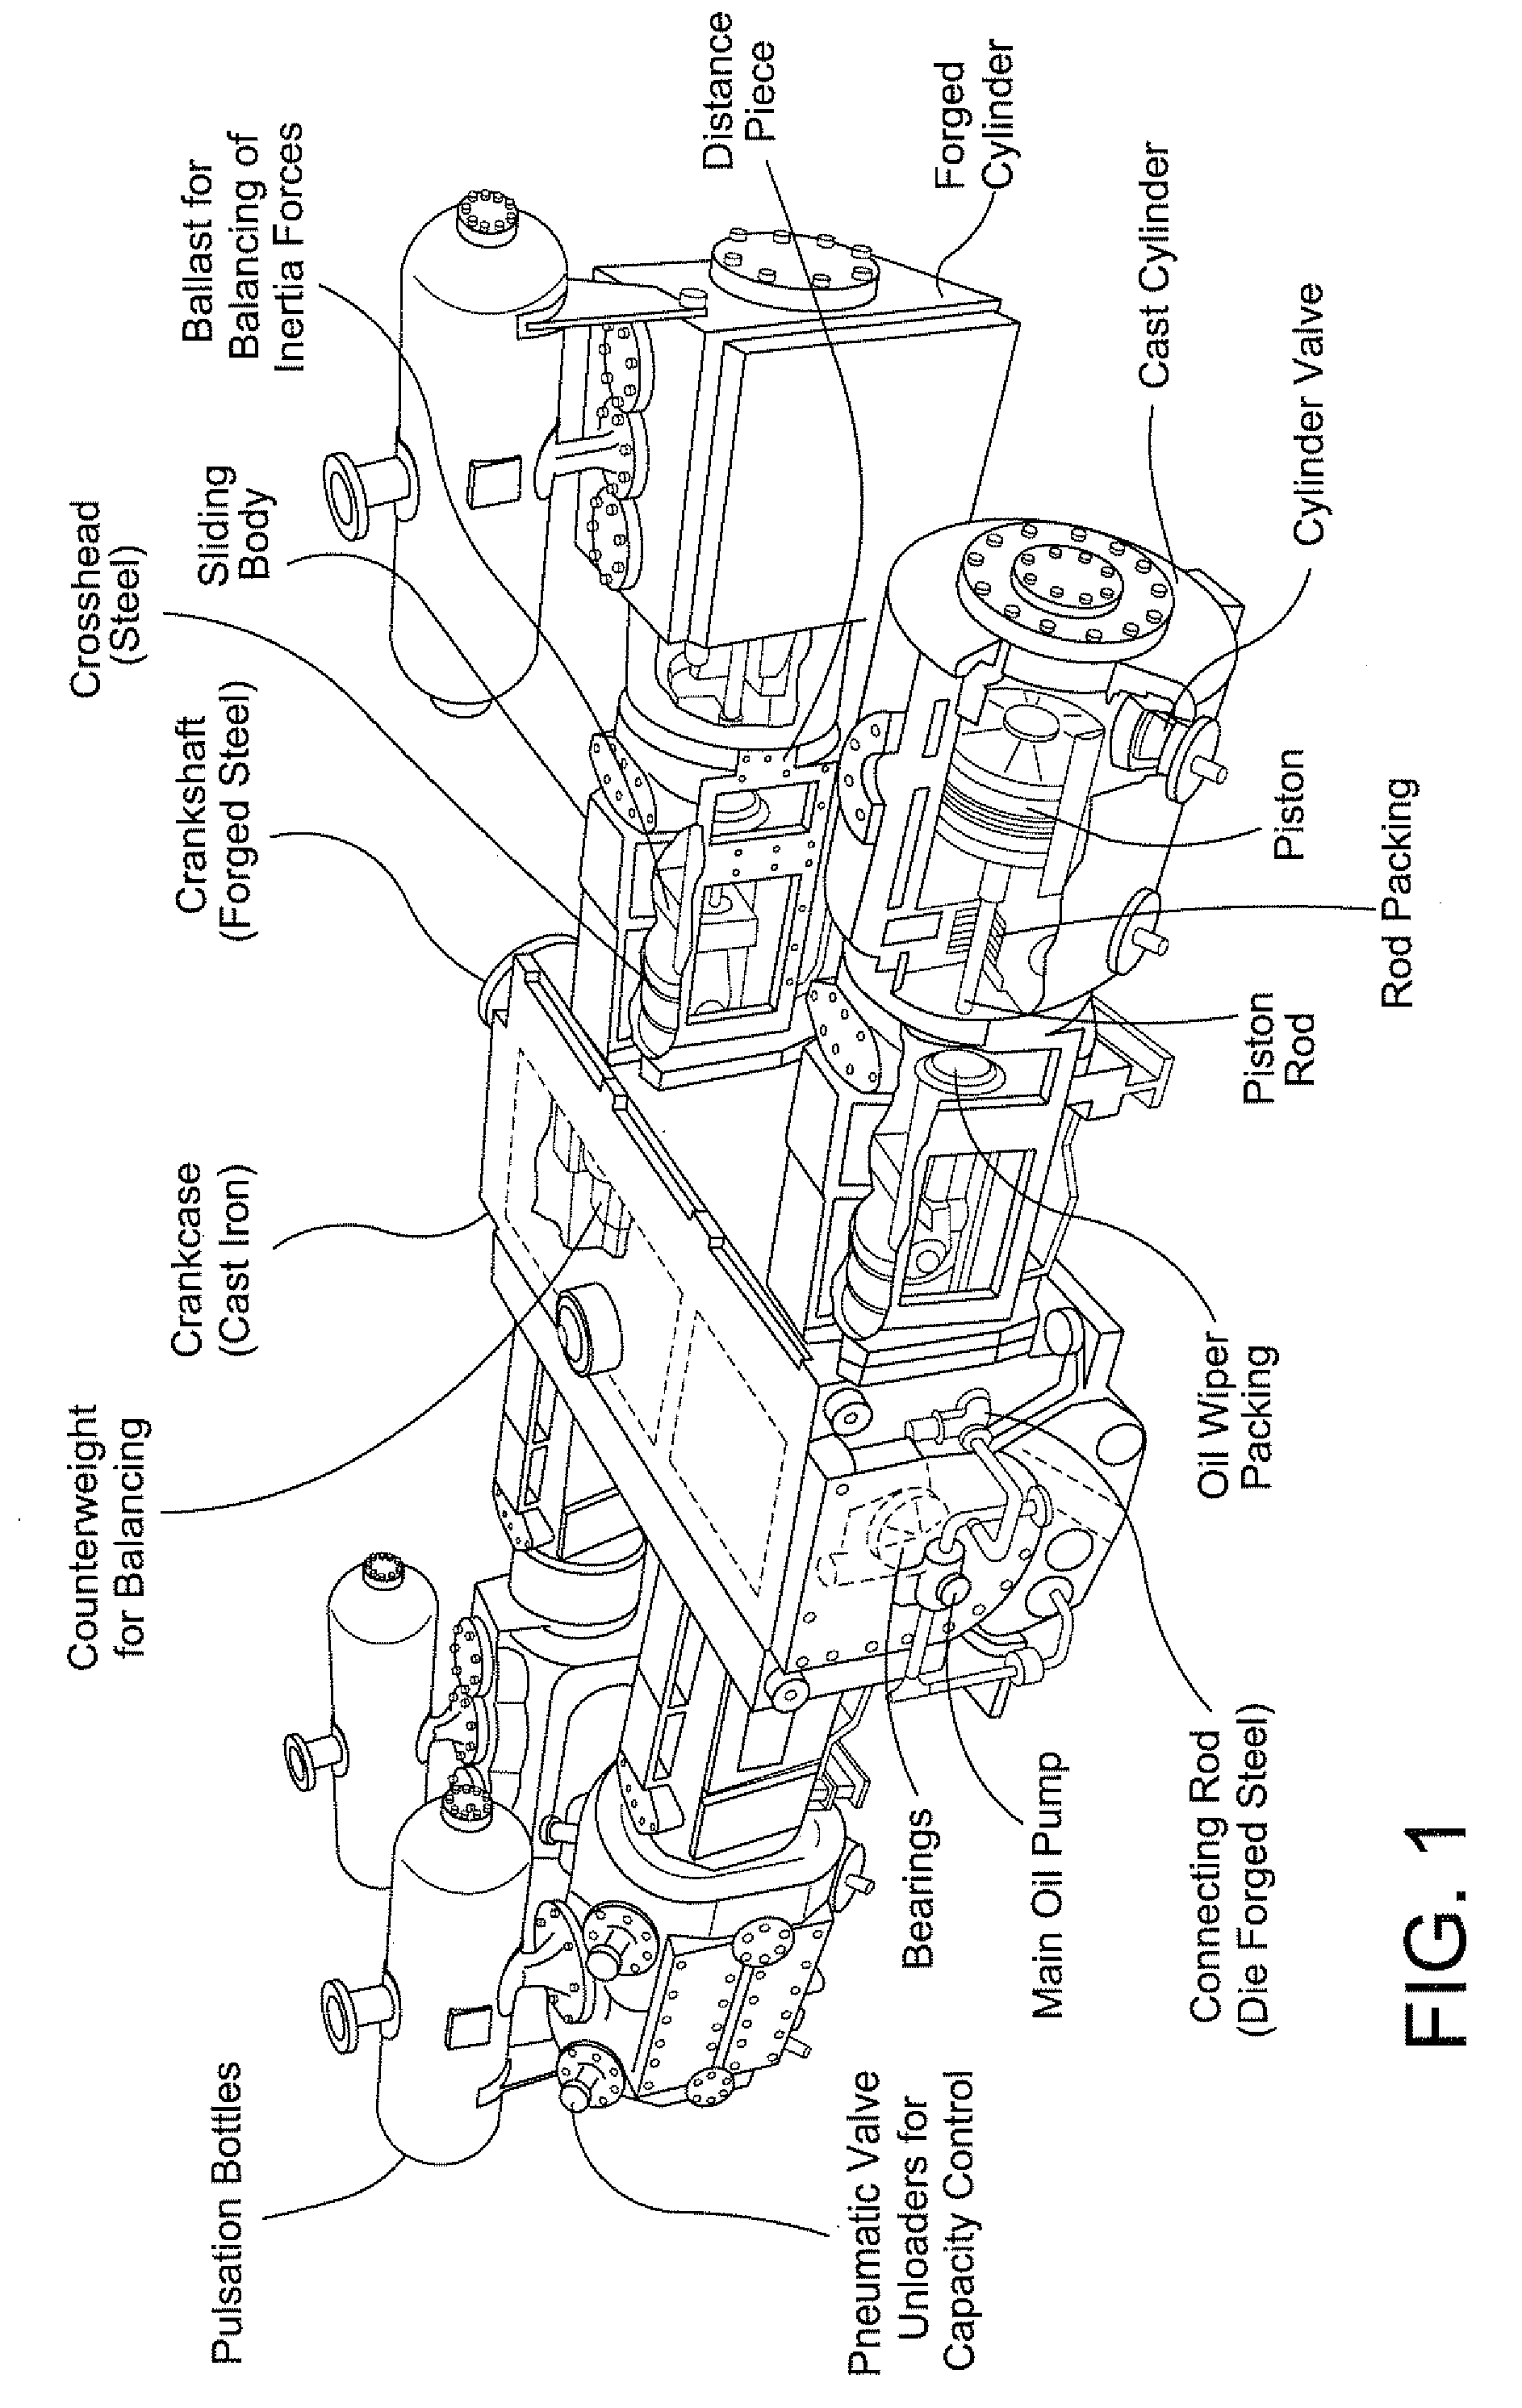 Method for Prevention/Detection of Mechanical Overload in a Reciprocating Gas Compressor